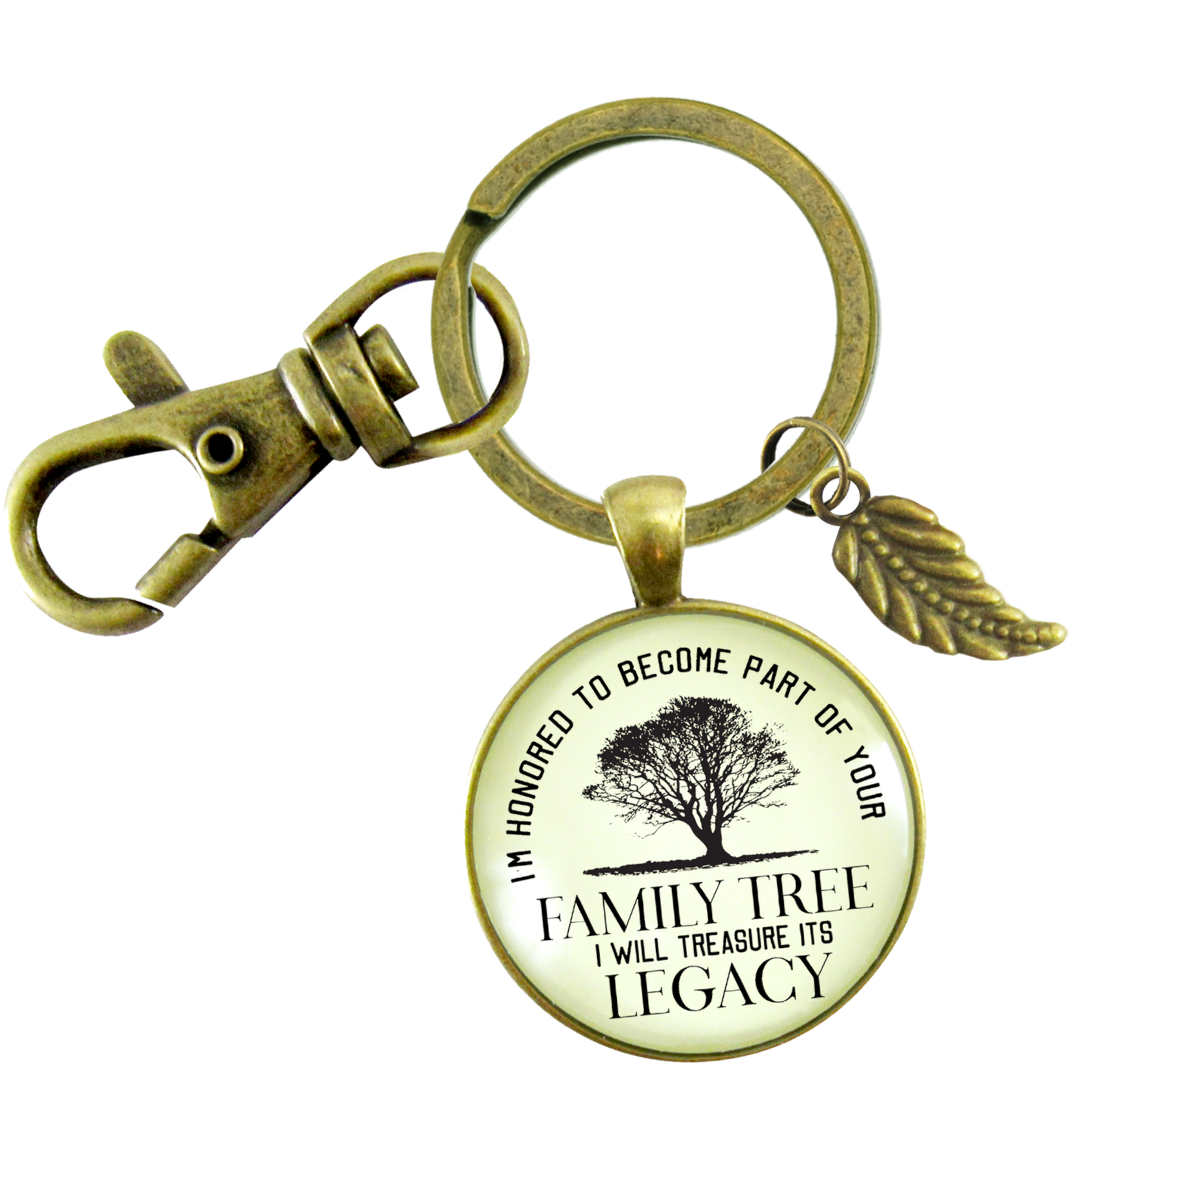 His Father In Law Gift Keychain Honored Family Tree From Groom To Father of Bride Wedding Key Ring - Gutsy Goodness Handmade Jewelry;His Father In Law Gift Keychain Honored Family Tree From Groom To Father Of Bride Wedding Key Ring - Gutsy Goodness Handmade Jewelry Gifts